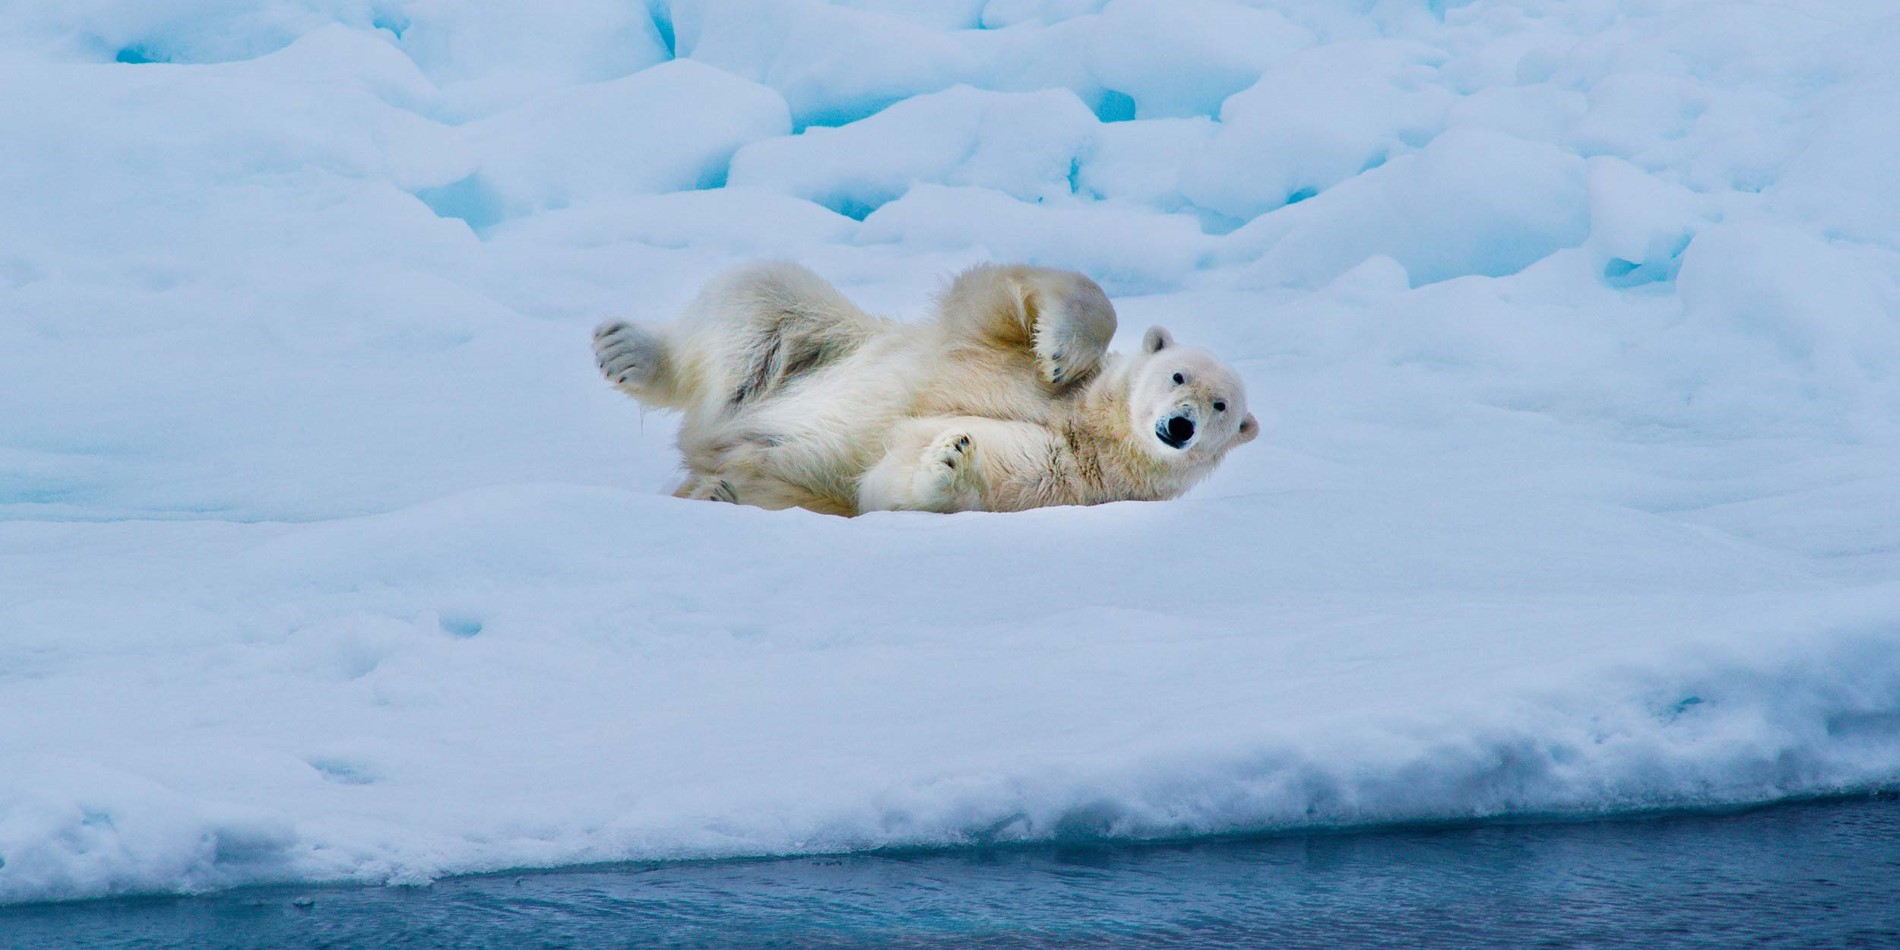 Polar bear laying down on it's side on the ice, looking at photographer